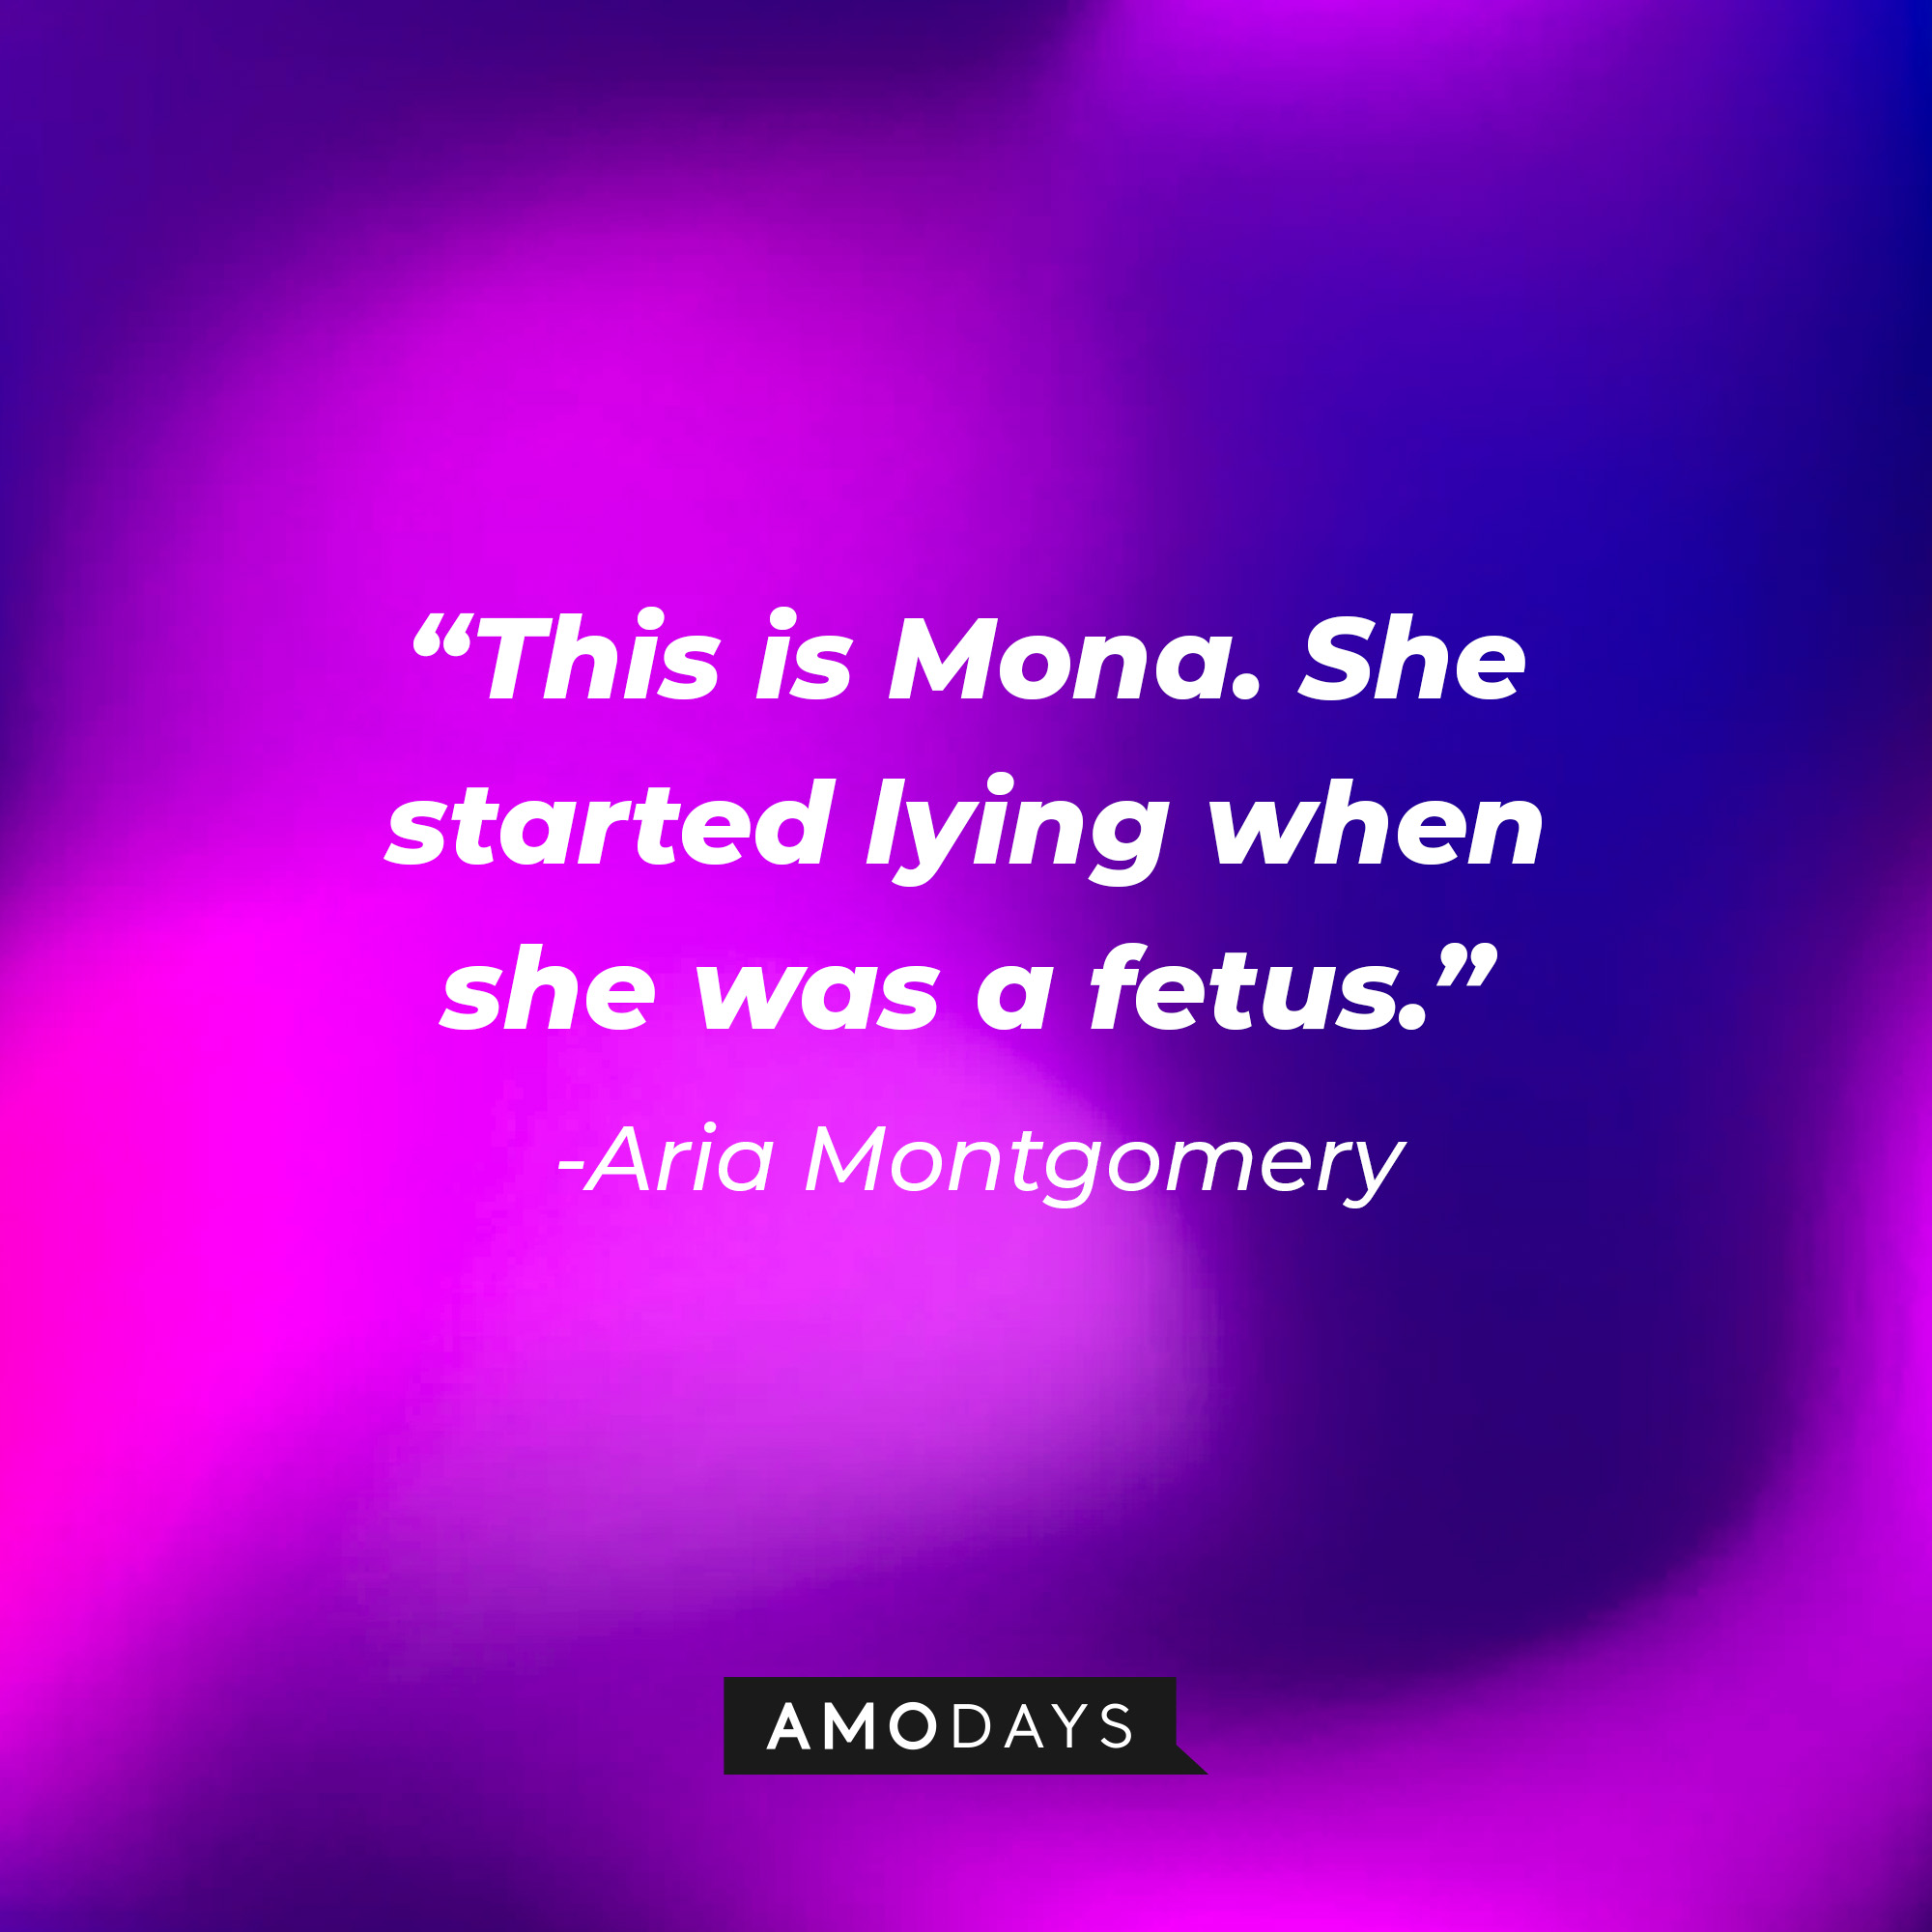 Aria Montgomery's quote: "This is Mona. She started lying when she was a fetus." | Source: Amodays